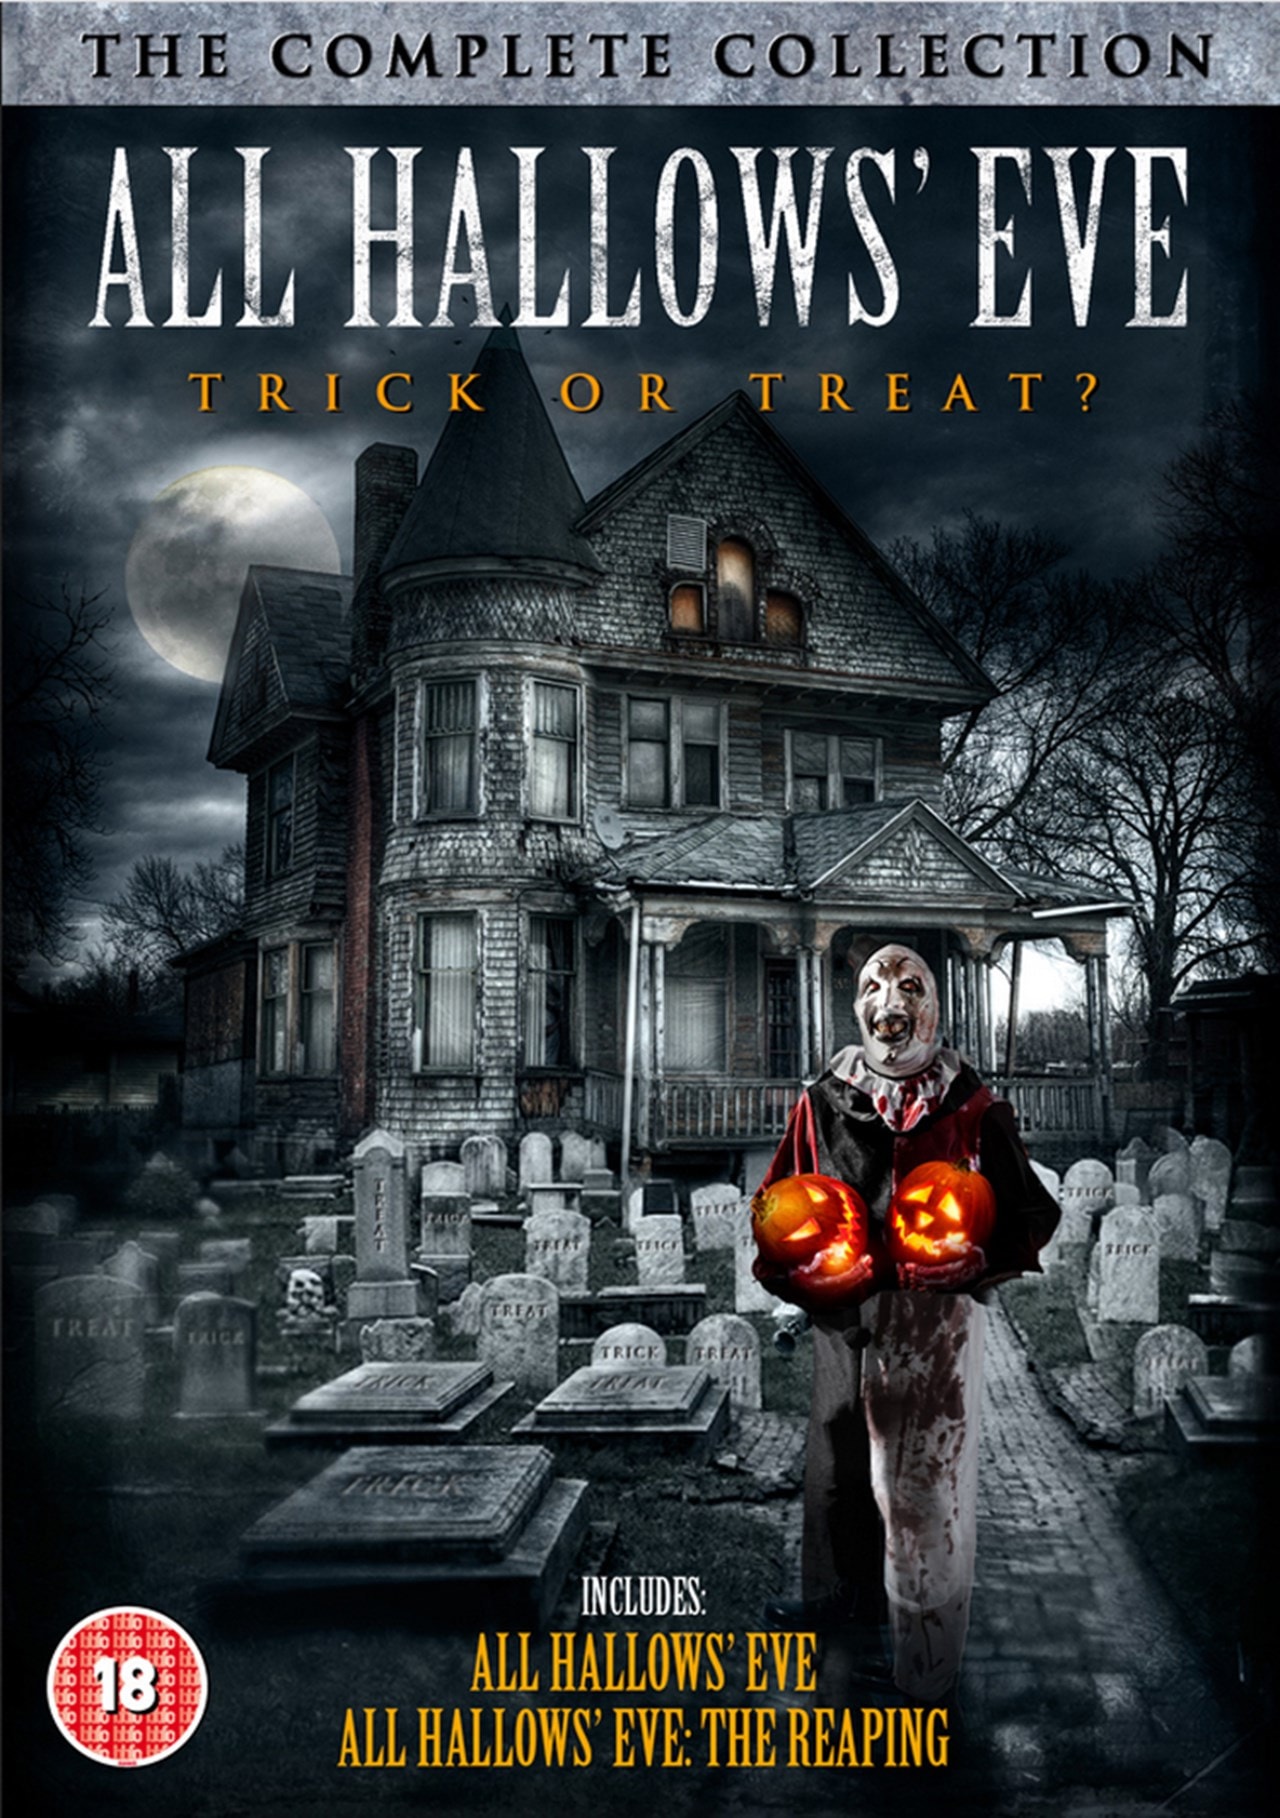 All Hallows' Eve: The Complete Collection  DVD  Free shipping over £20  HMV Store